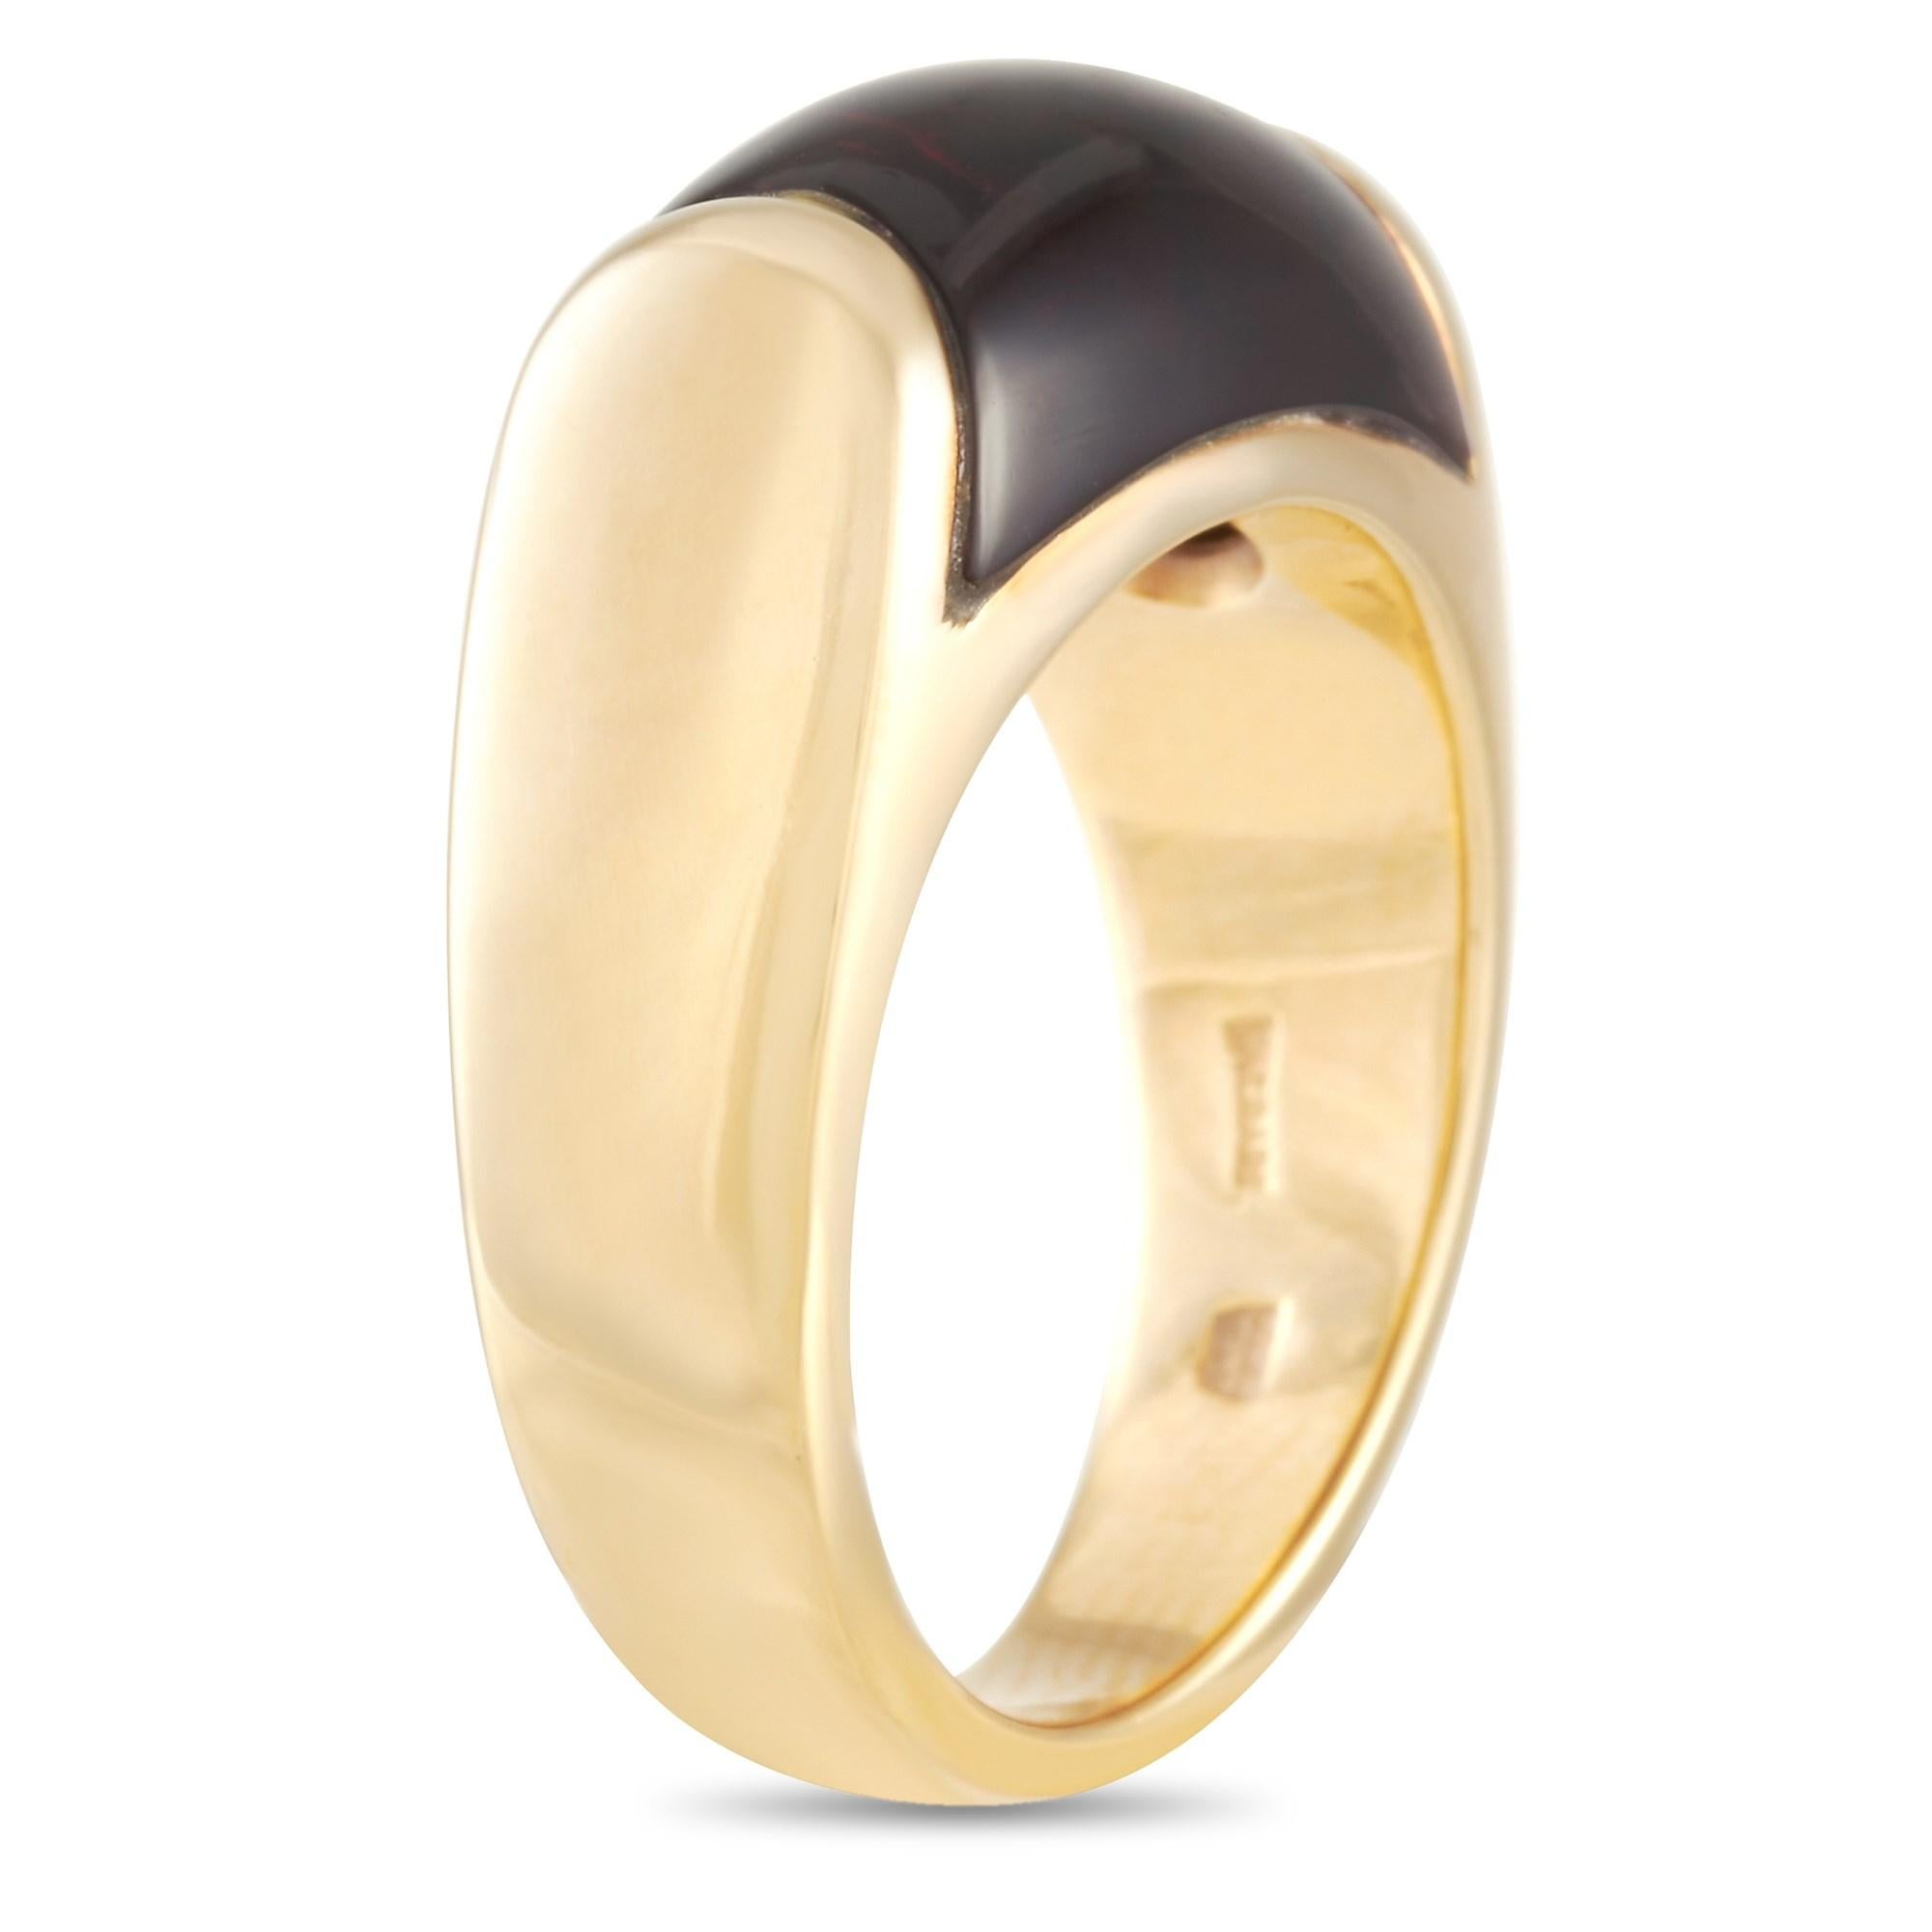 Adorned with a stone of empowerment, this bodacious Bvlgari Tronchetto Ring in 18K yellow gold will make a fine gift for a special January-born lady. This cocktail ring features a 6mm band with 6mm top height decorated at the center with a beautiful